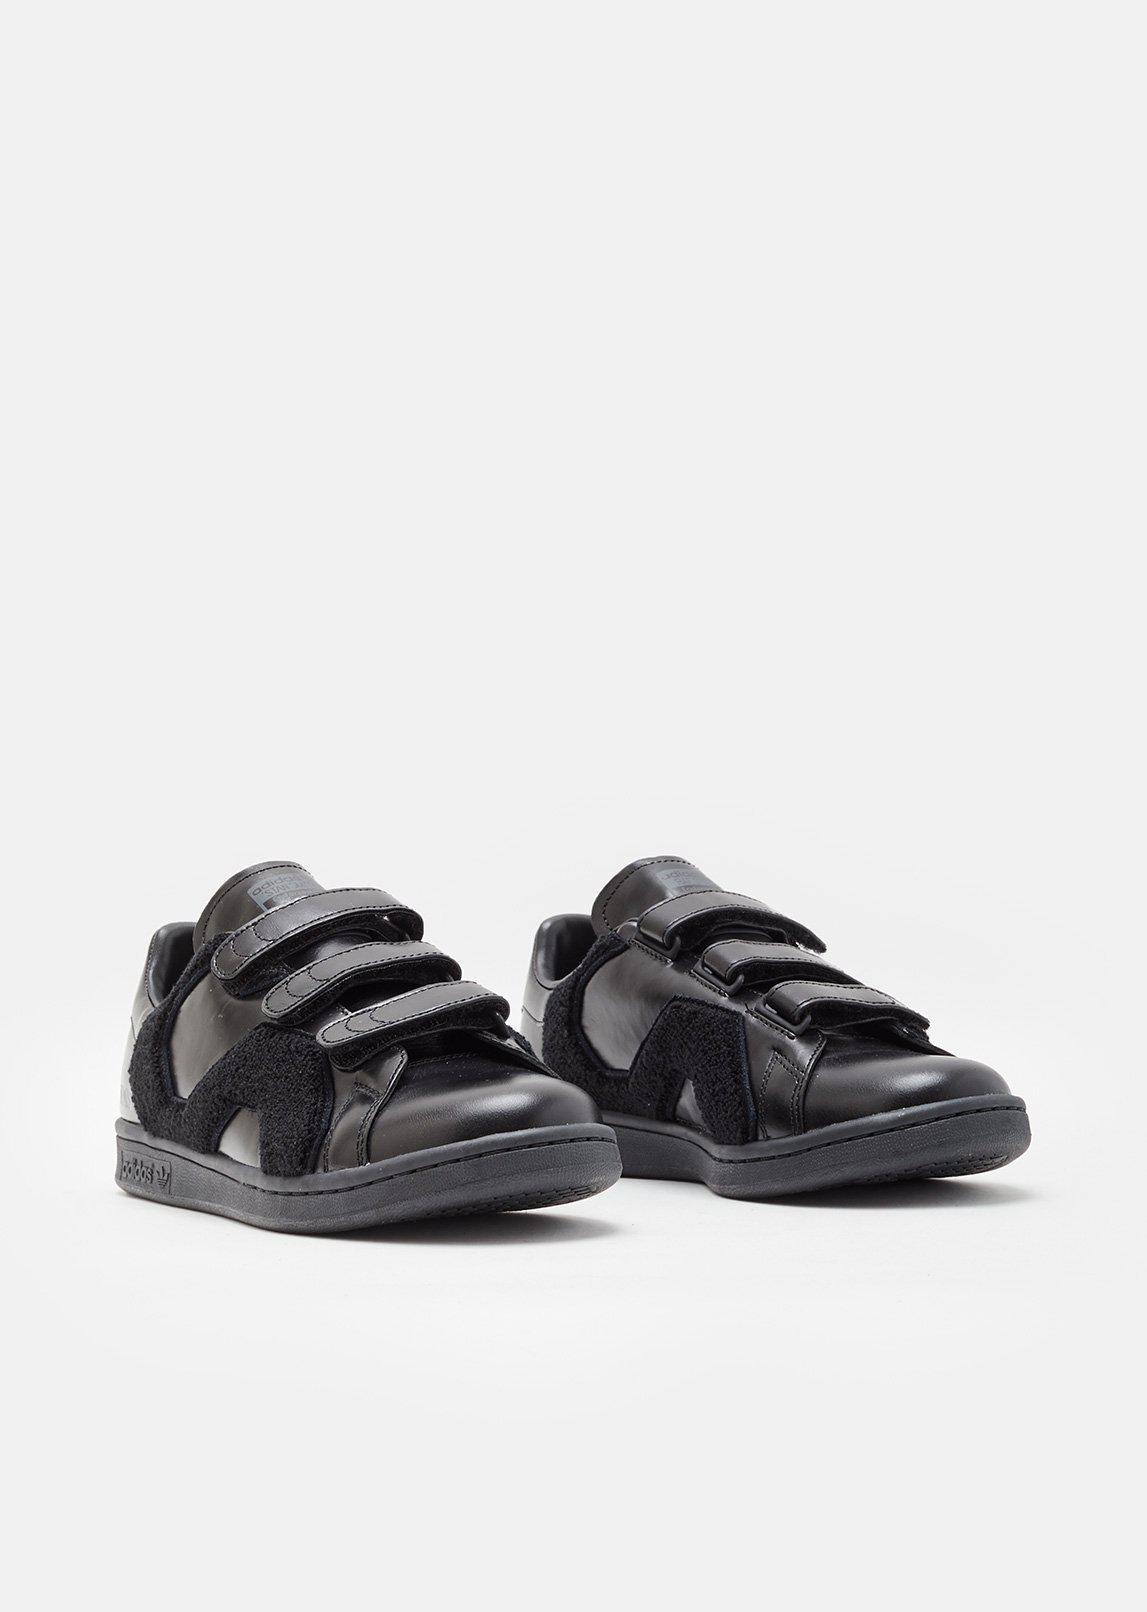 adidas By Raf Simons Leather Stan Smith Velcro Sneakers in Black - Lyst